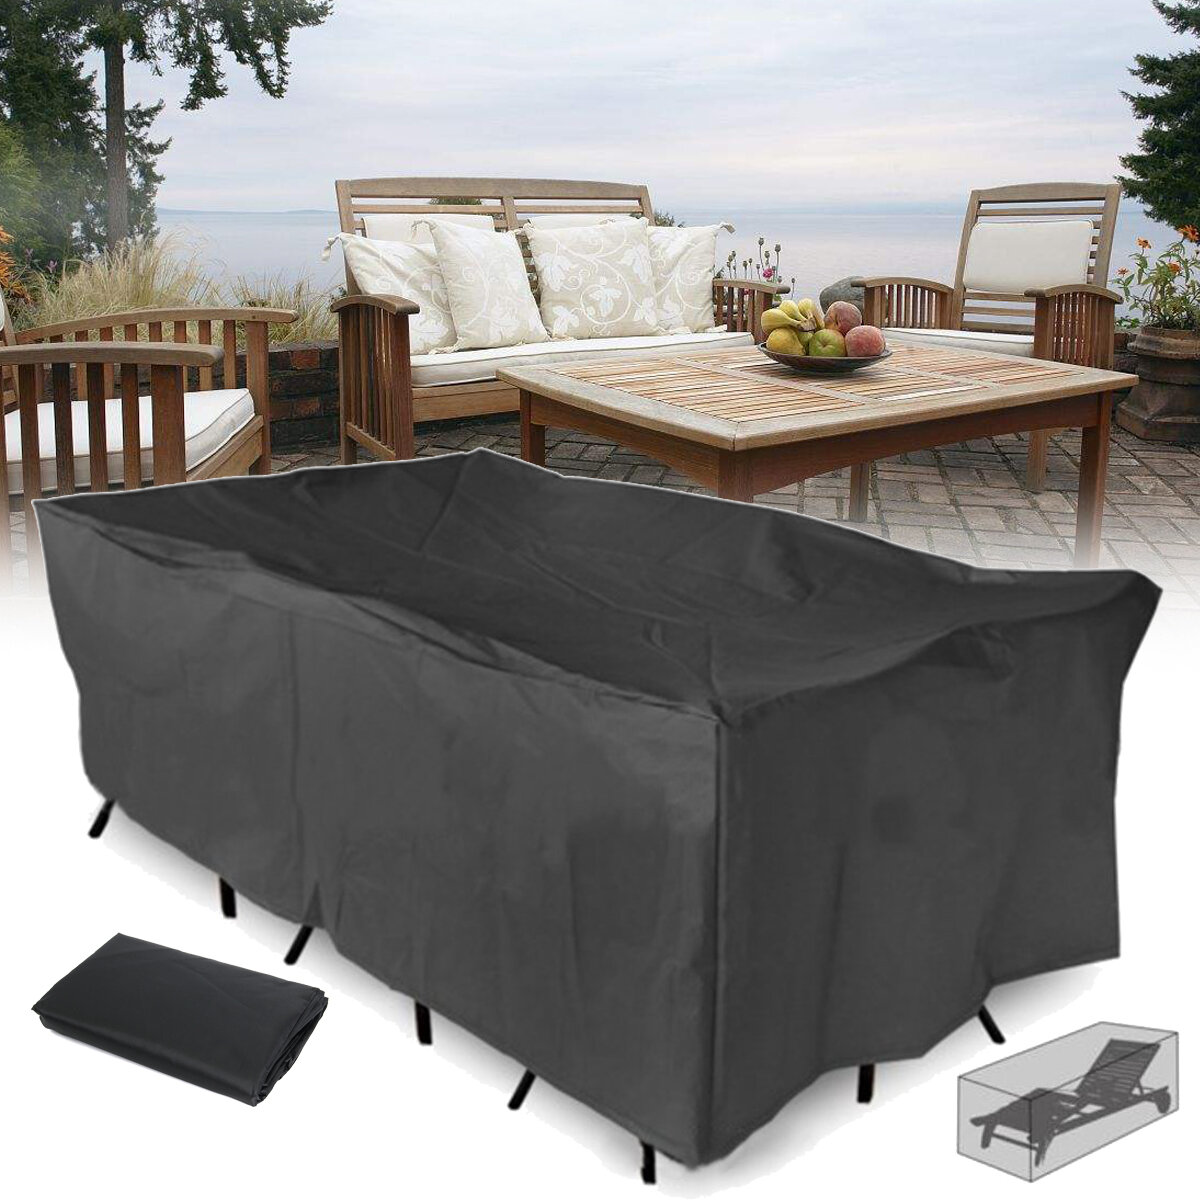 210x110x70CM Outdoor Garden Patio Furniture Waterproof Dust Cover Table Chair Sun Shelter 